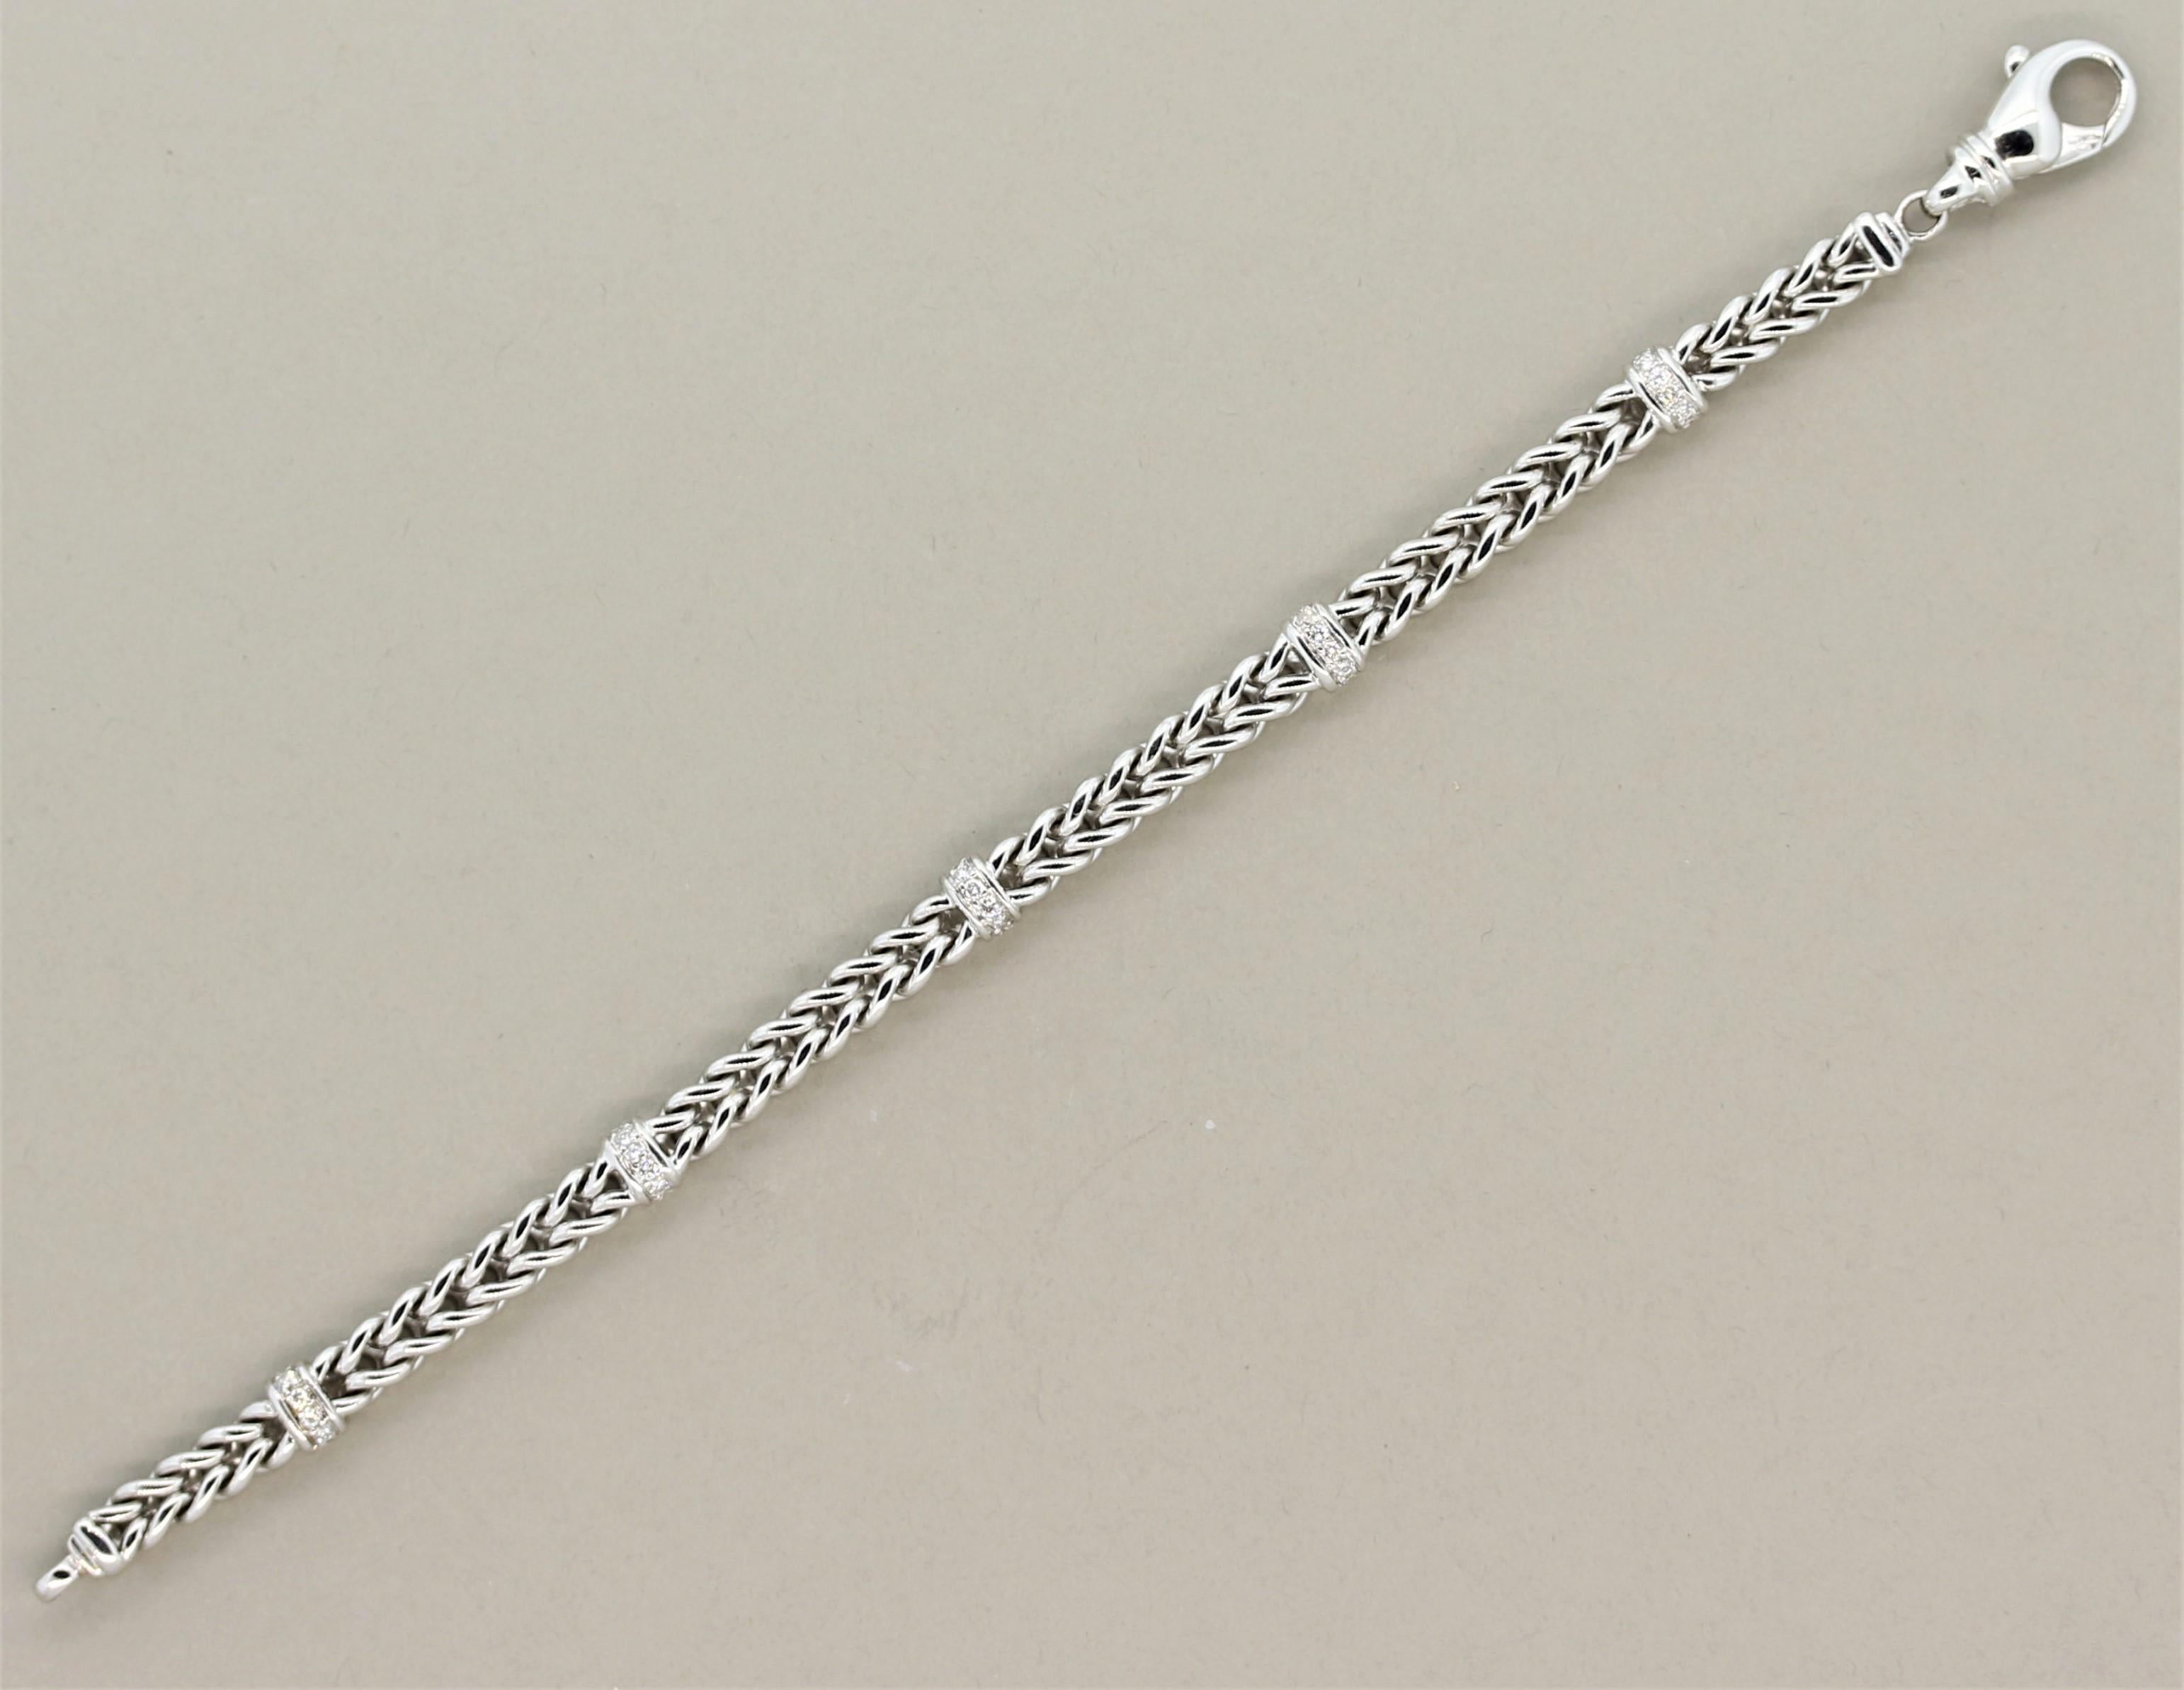 A classy white gold bracelet featuring 0.42 carats of round brilliant cut diamonds. The bracelet is made of links of 14k white gold that are interlocked and have the slightest of stretches.

Length: 7.5 inches